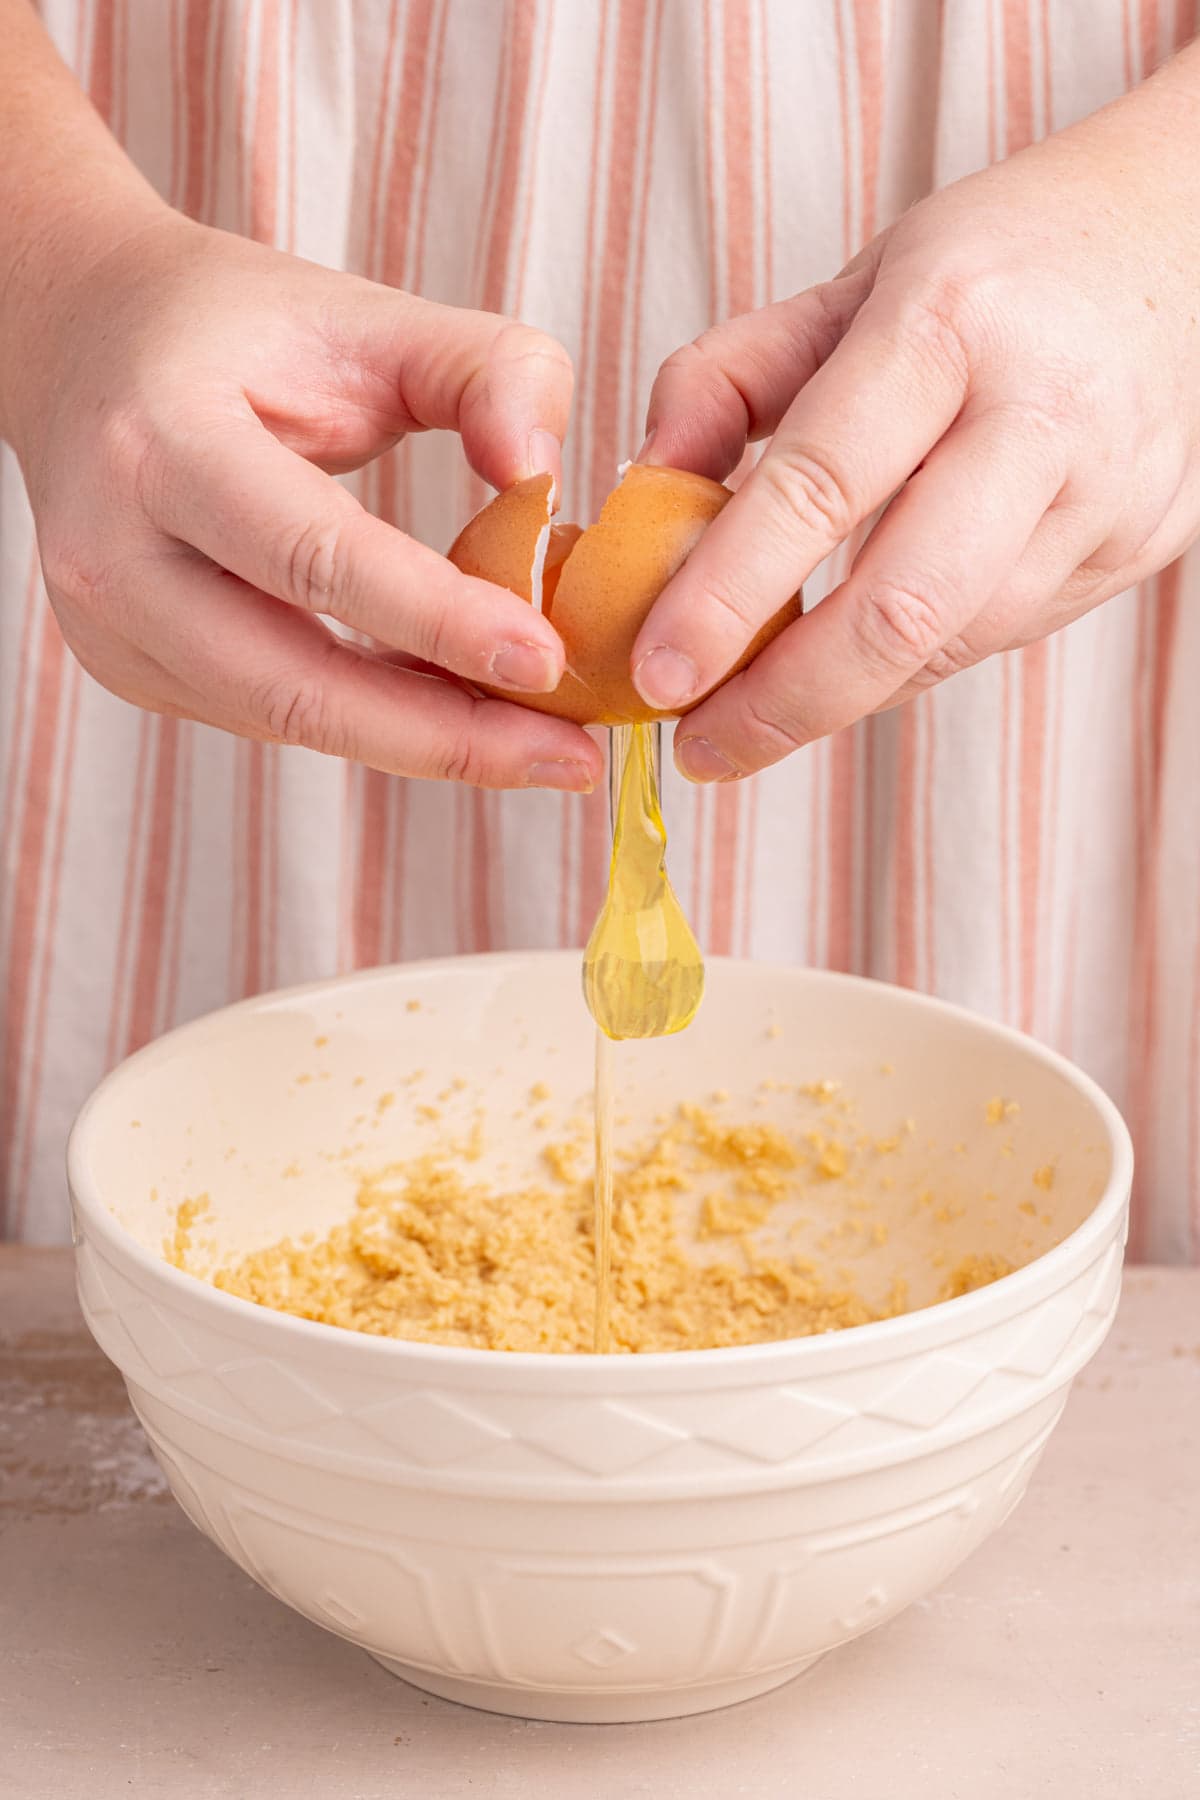 Cracking an egg into bowl with creamed brown sugar and butter.